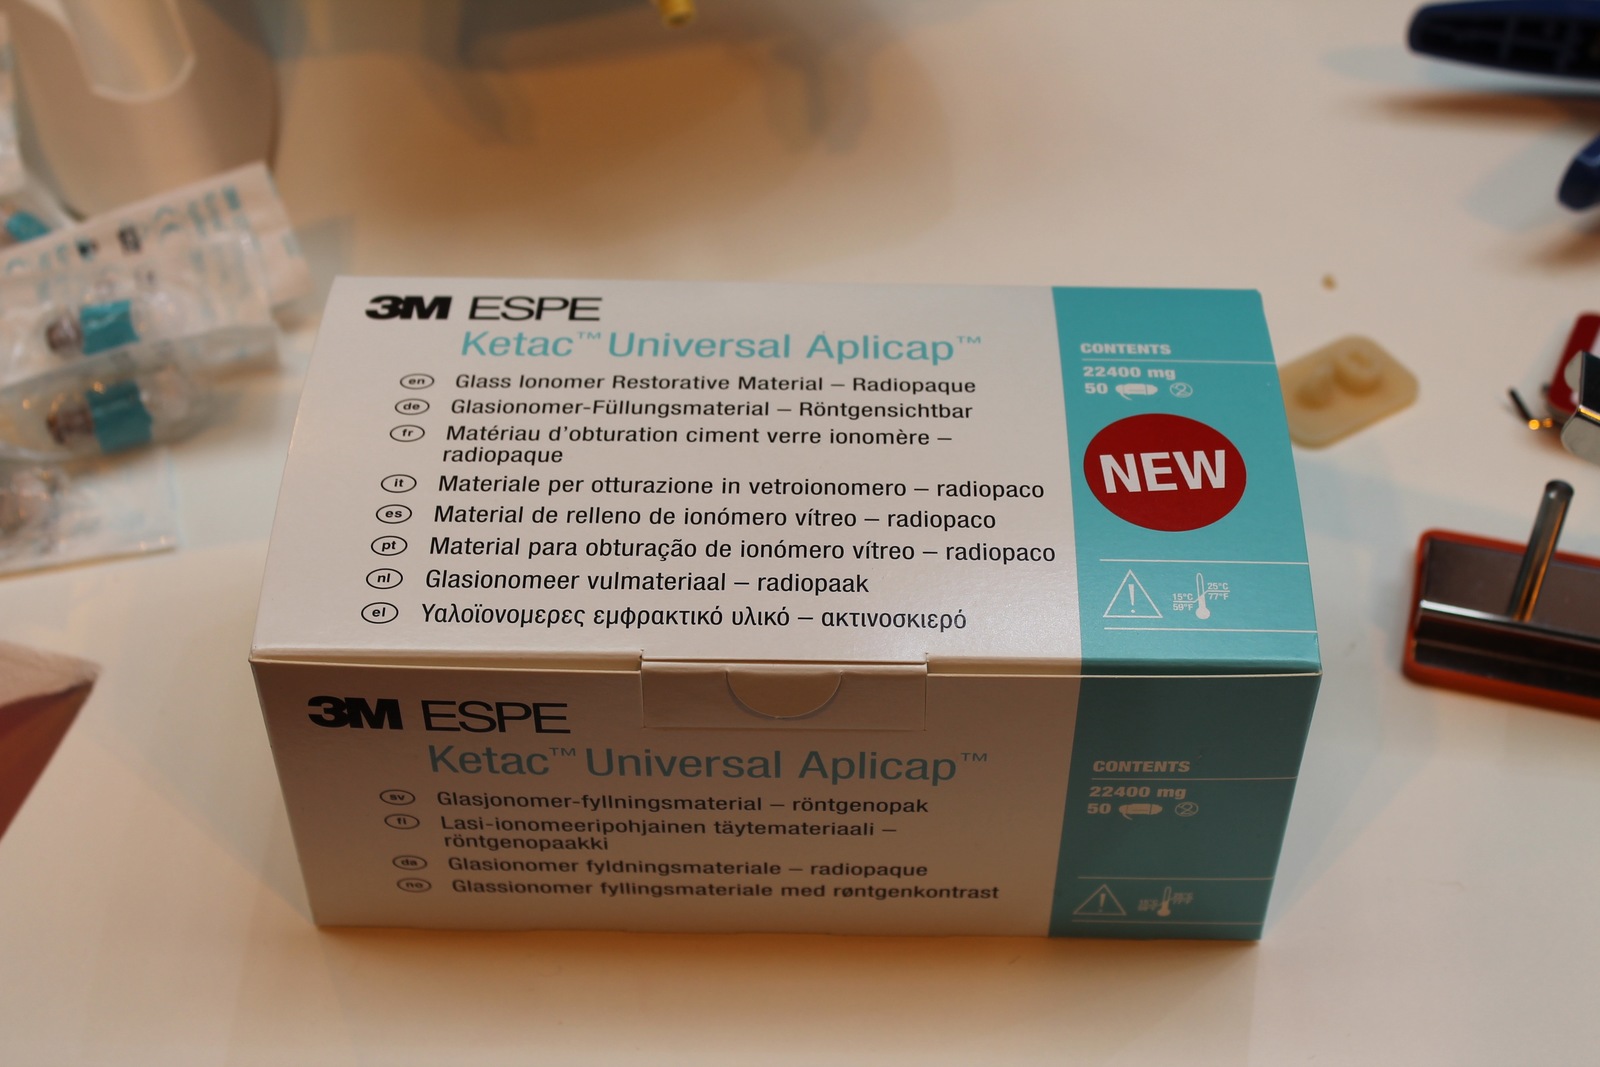 New glass ionomer restorative launched at The Dentistry Show